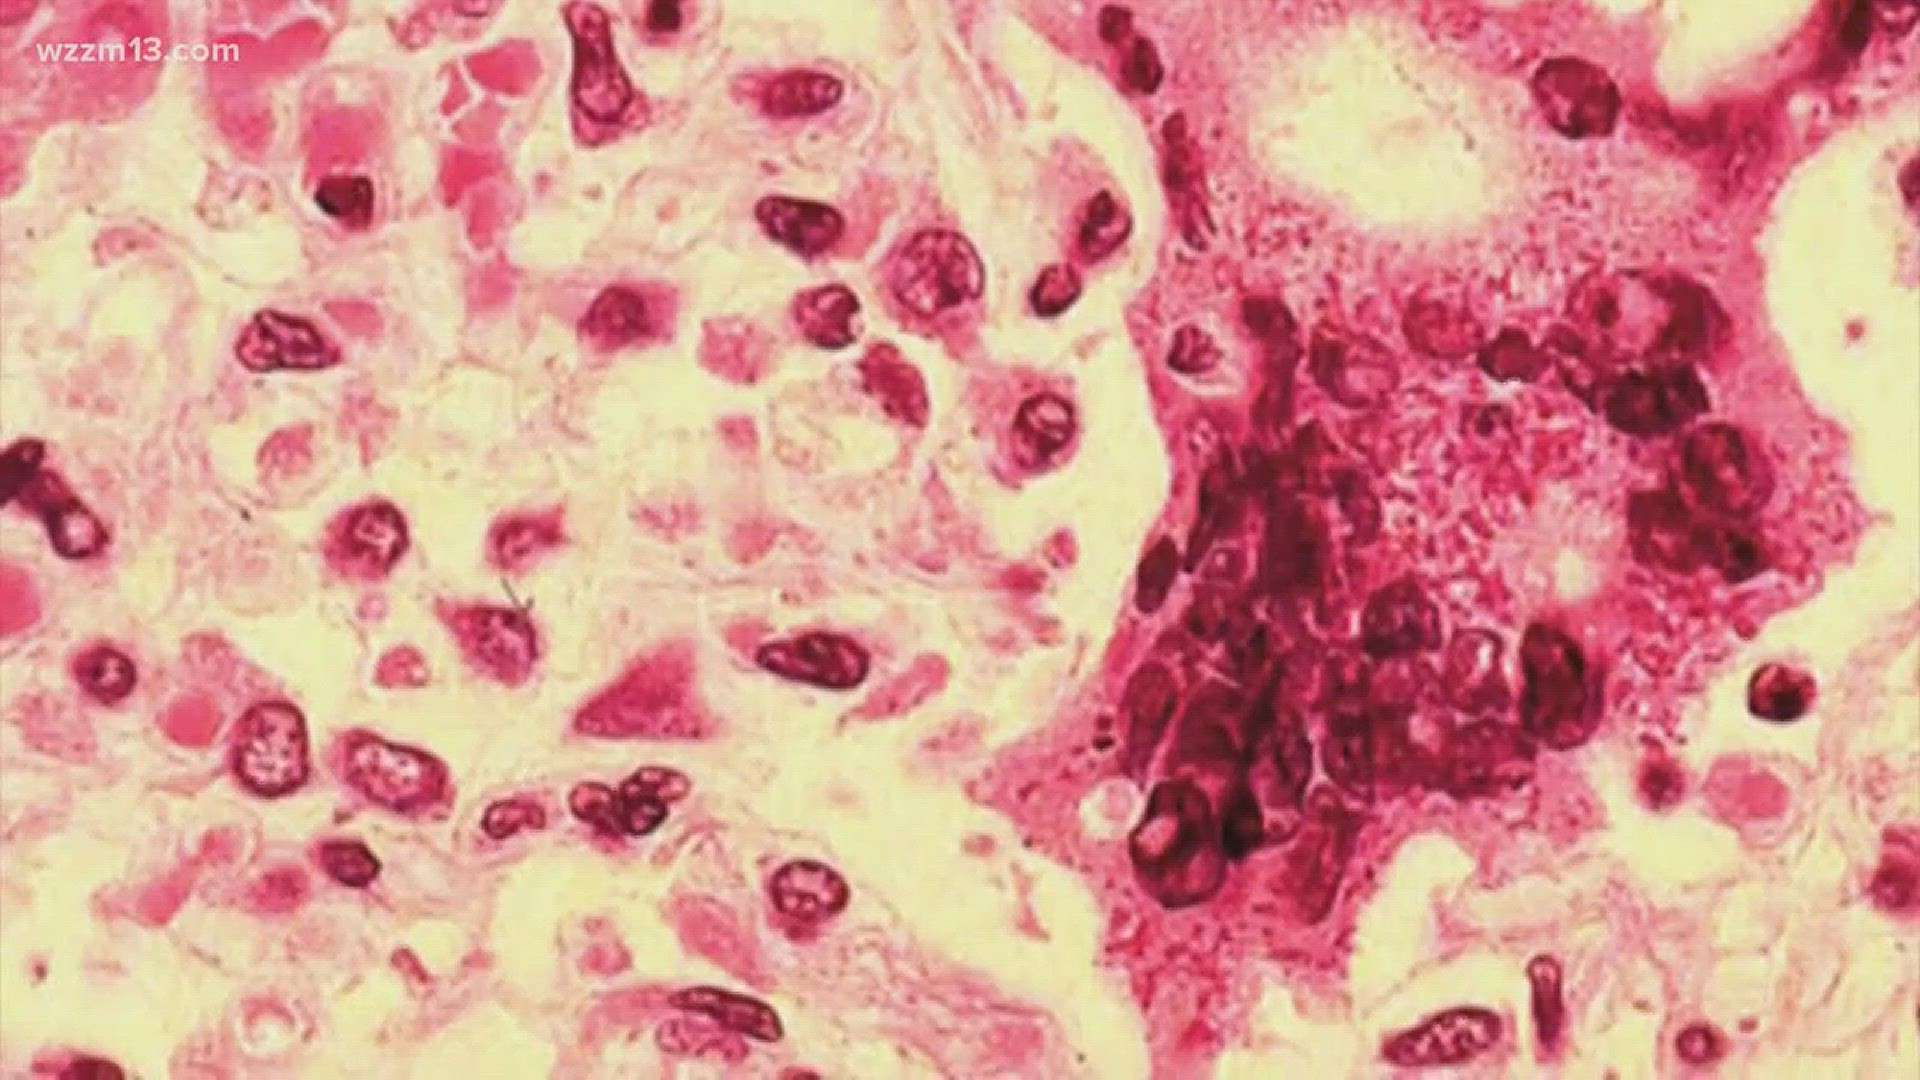 Michigan's 1st confirmed measles case